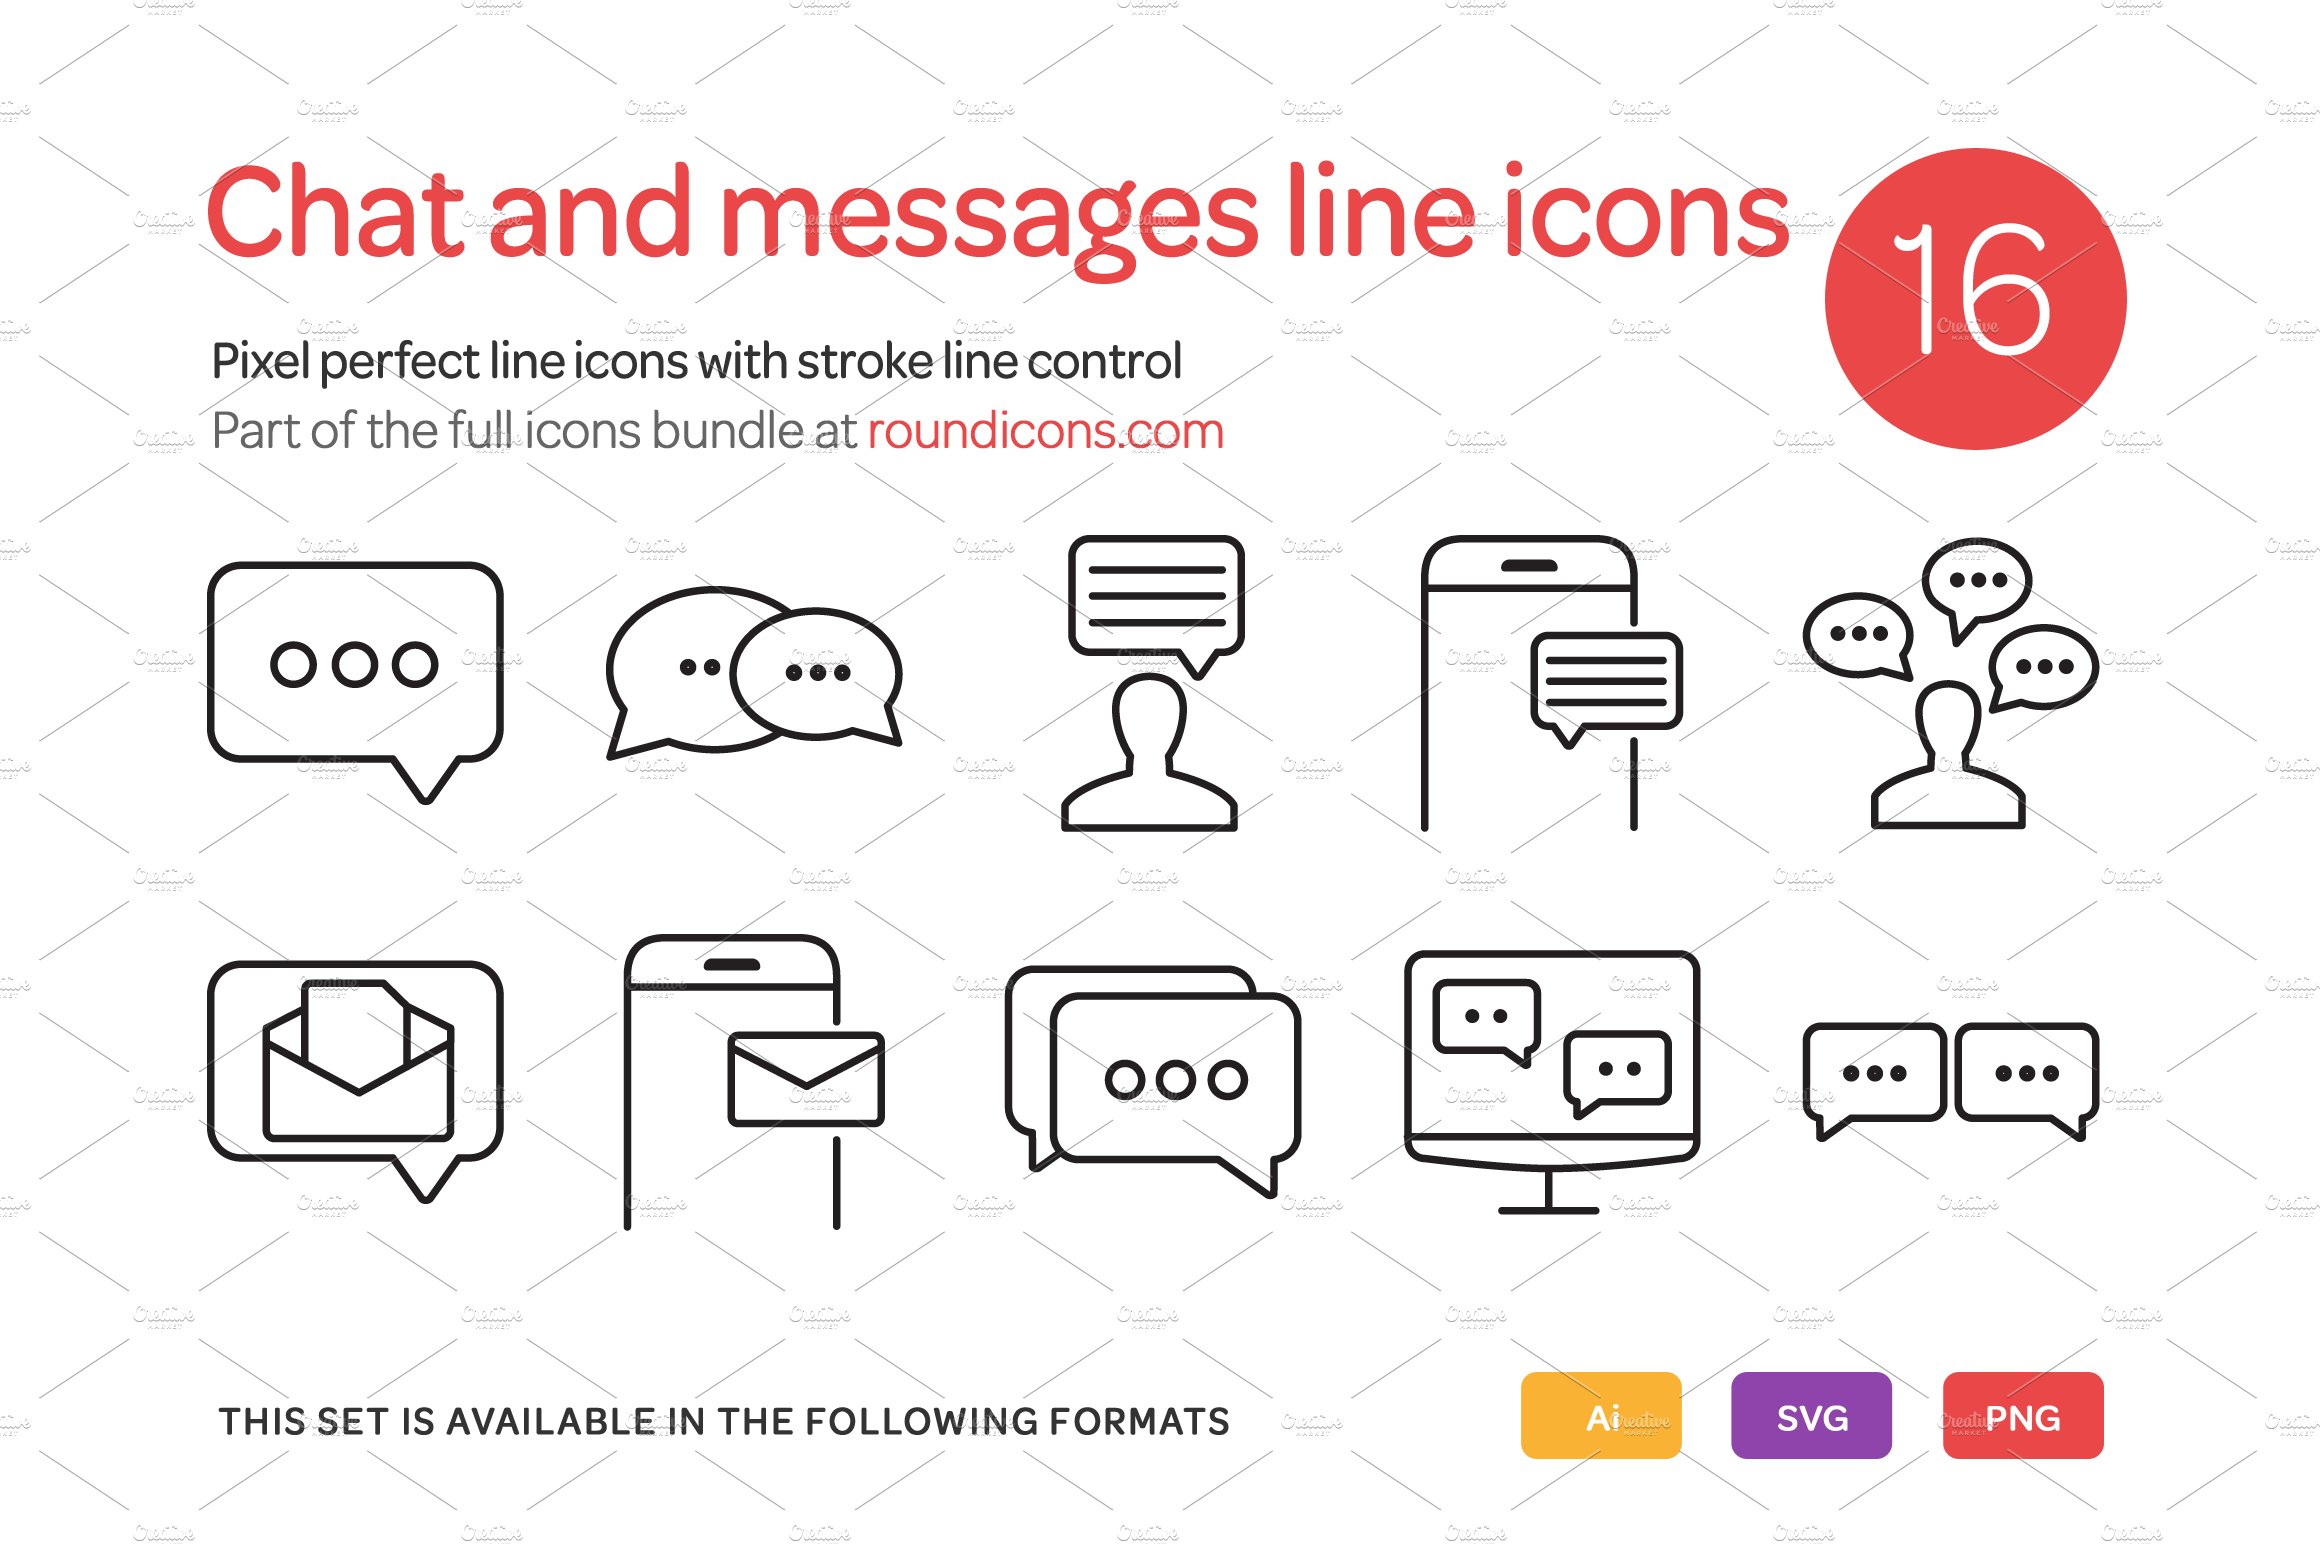 Chat and Messages Line Icons Set cover image.